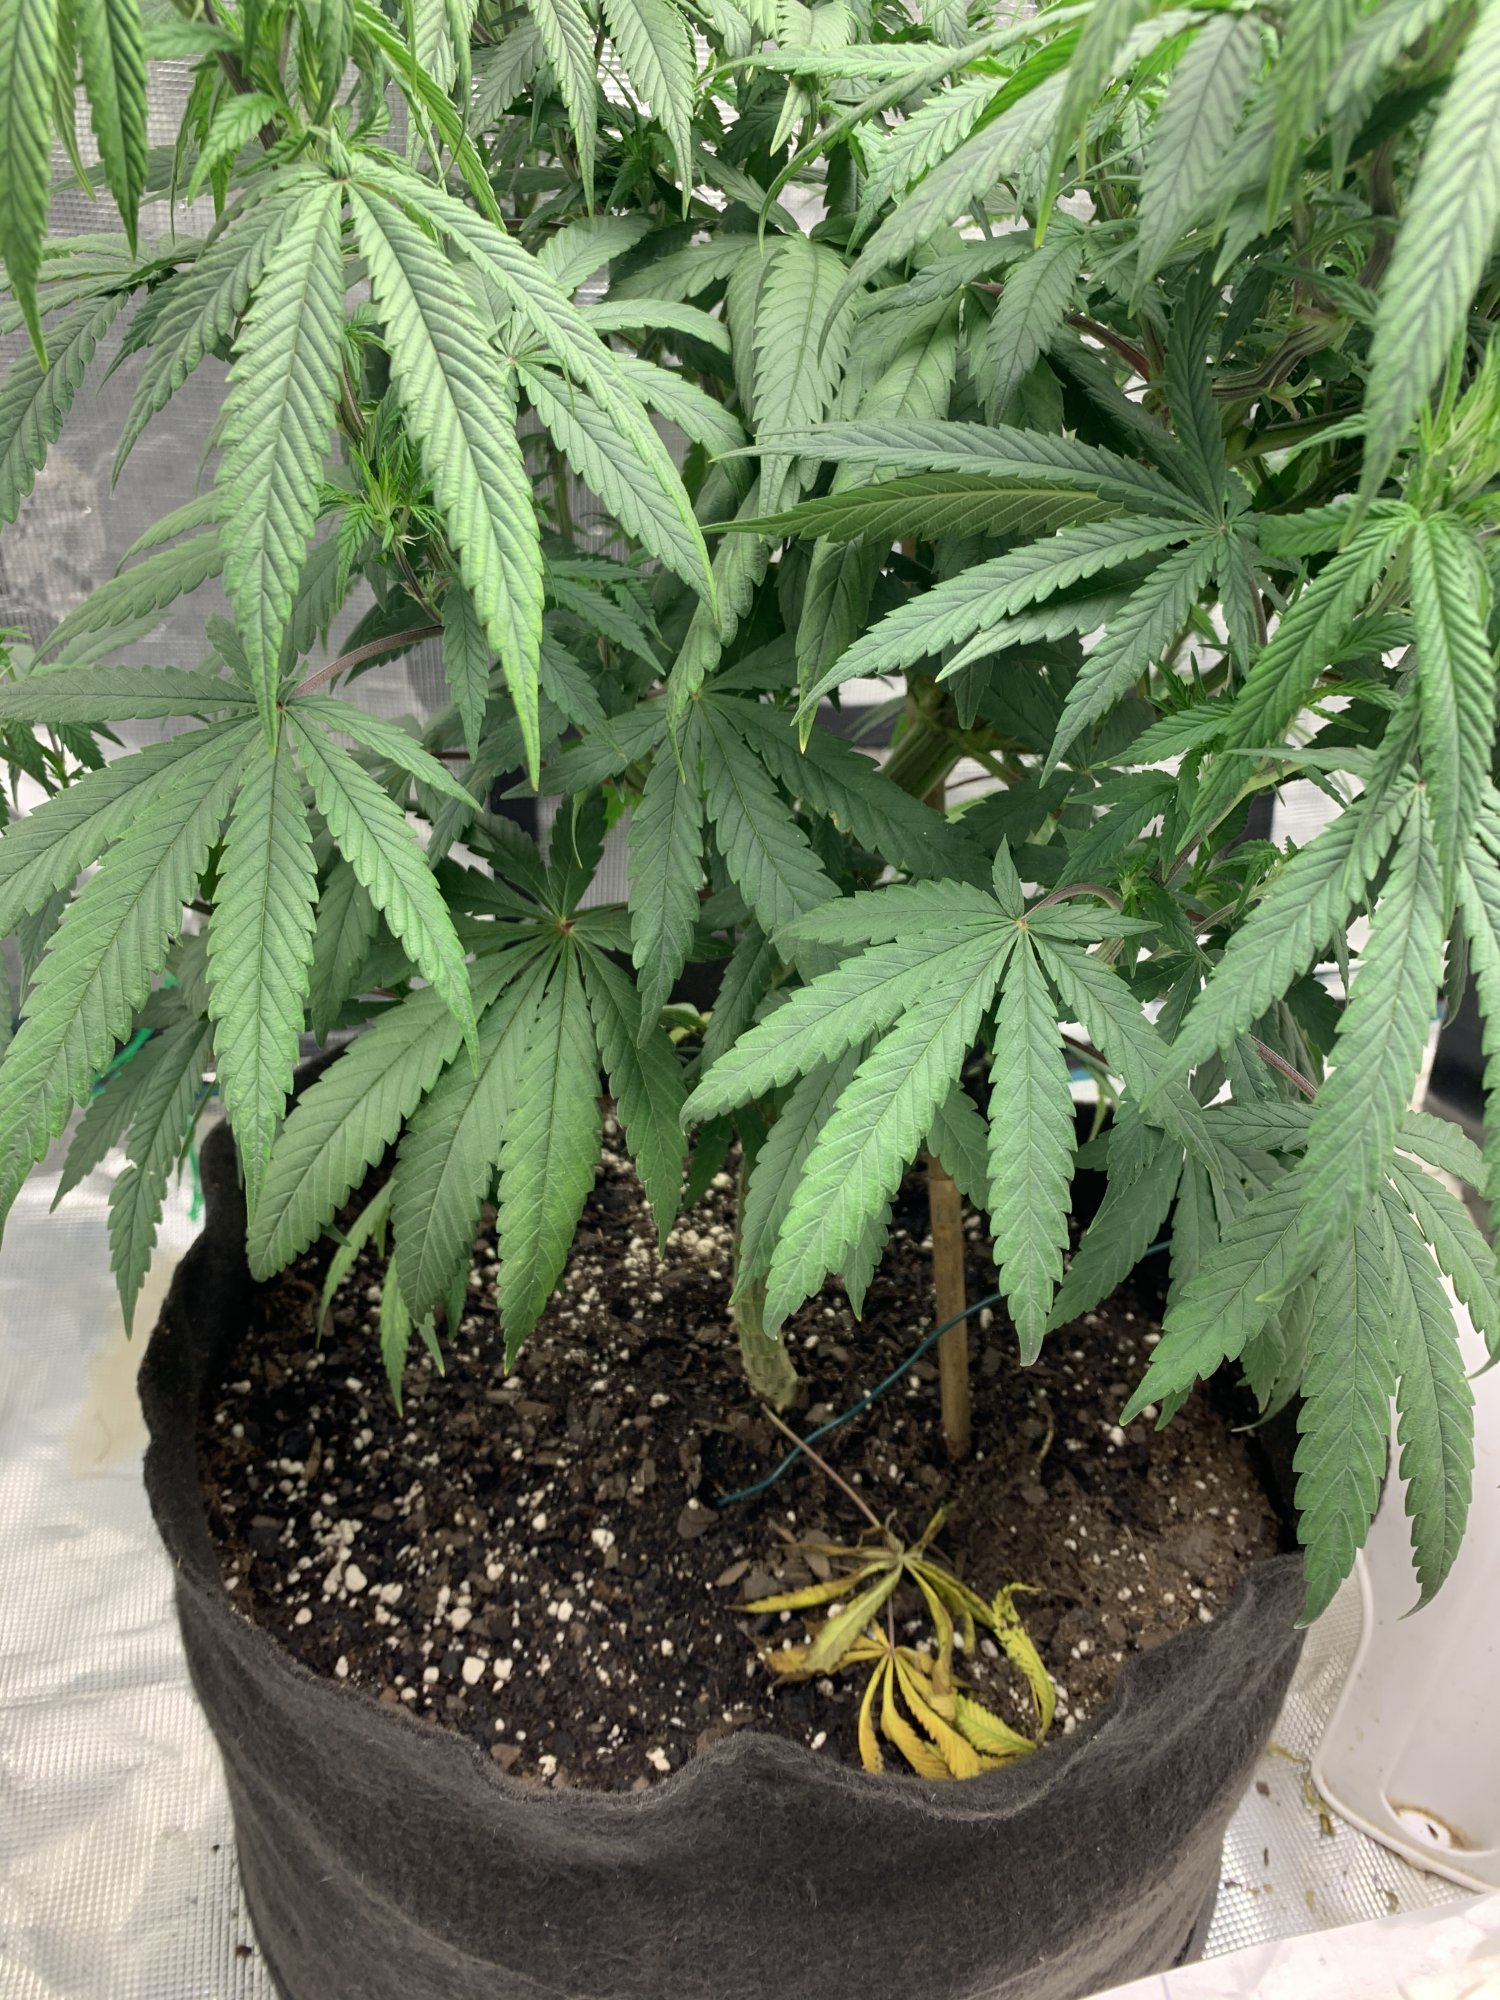 Star cookies continue to show deficiencies dont want to burn help 5